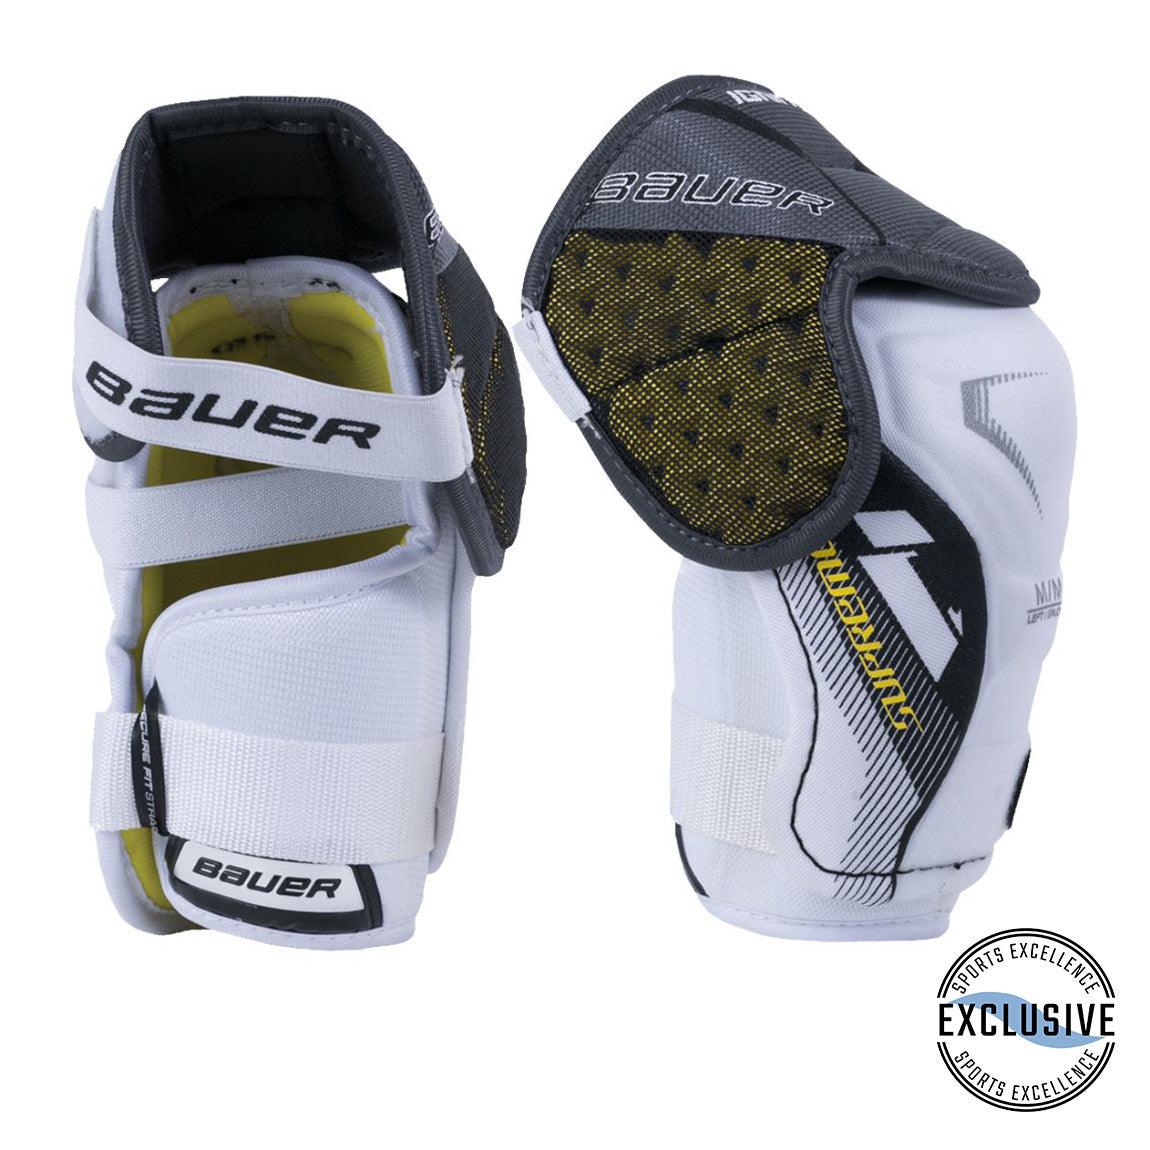 Supreme Ignite Elbow Pads - Junior - Sports Excellence